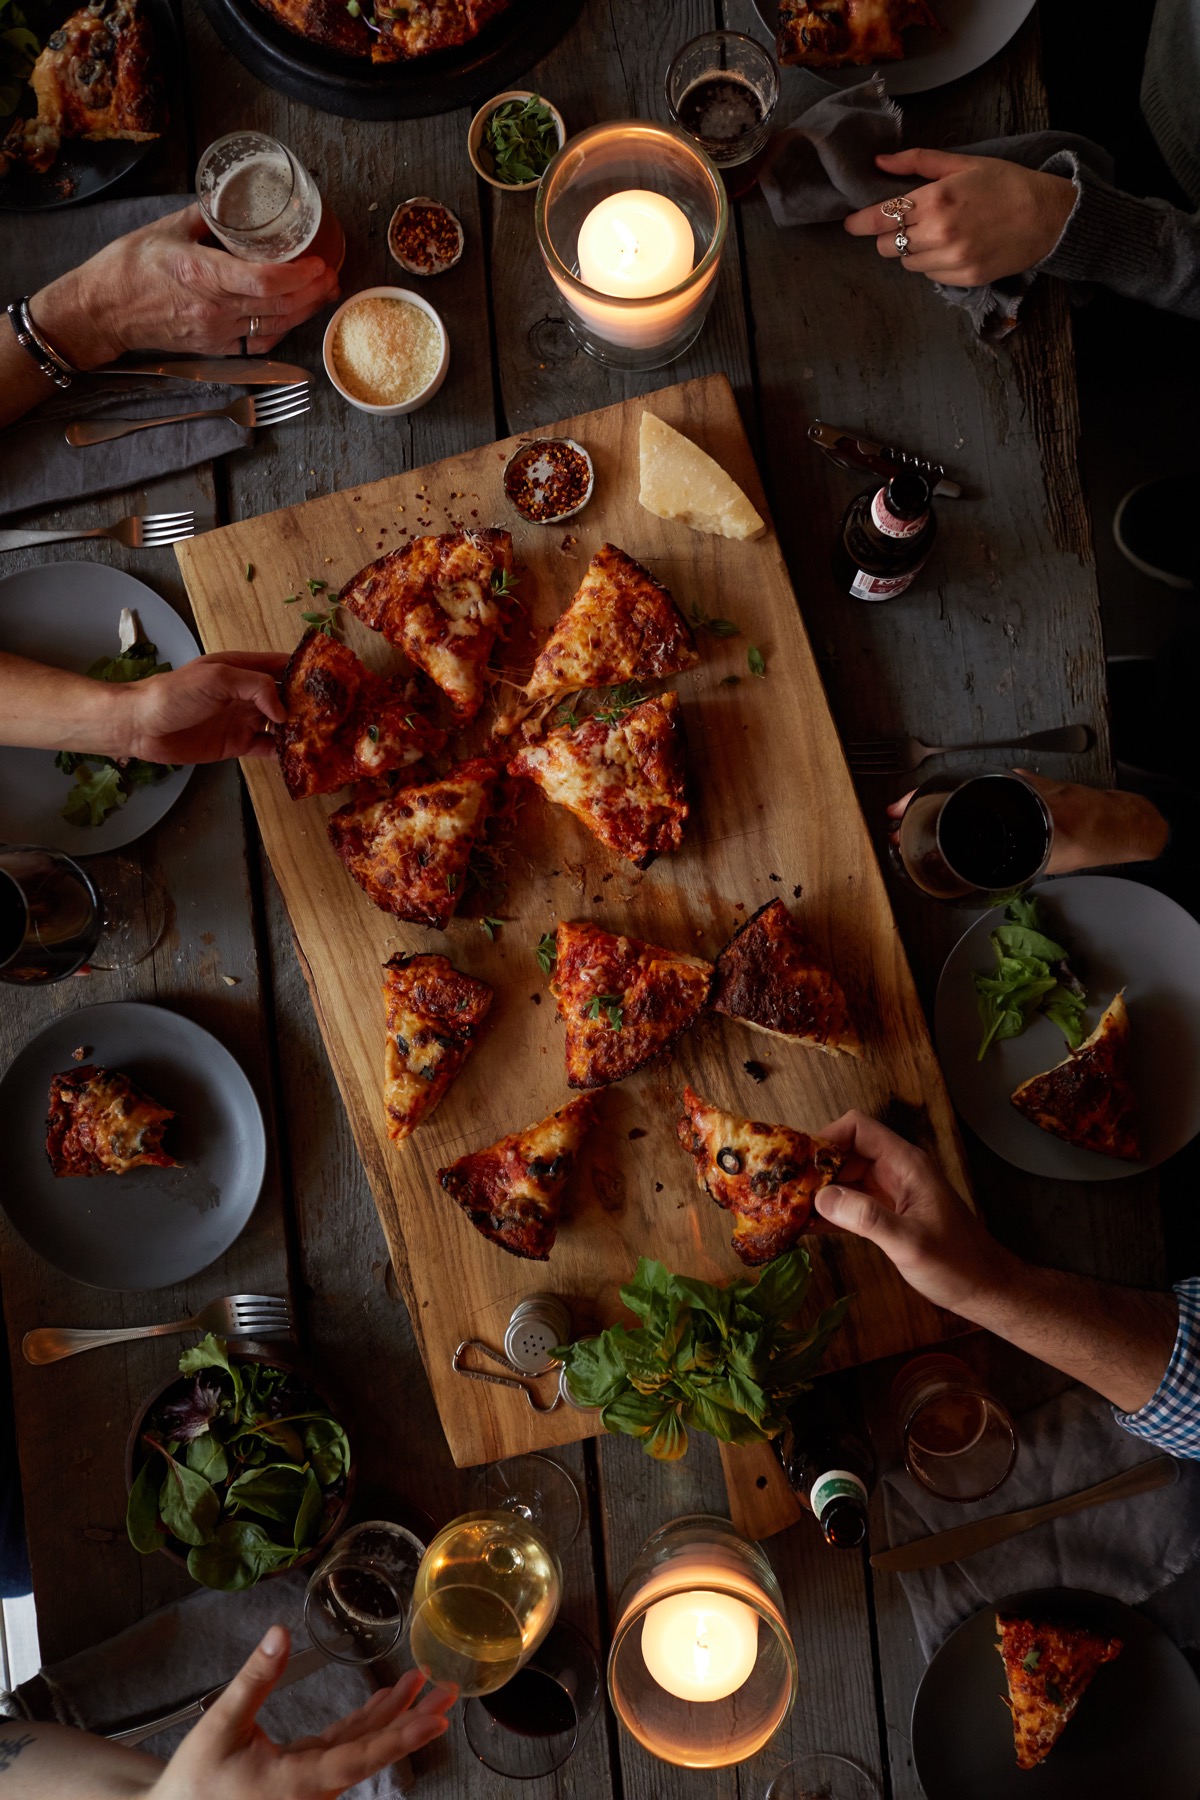 Baked pizza on a cutting board with lit candles, wine, beer, and hands of people sharing.